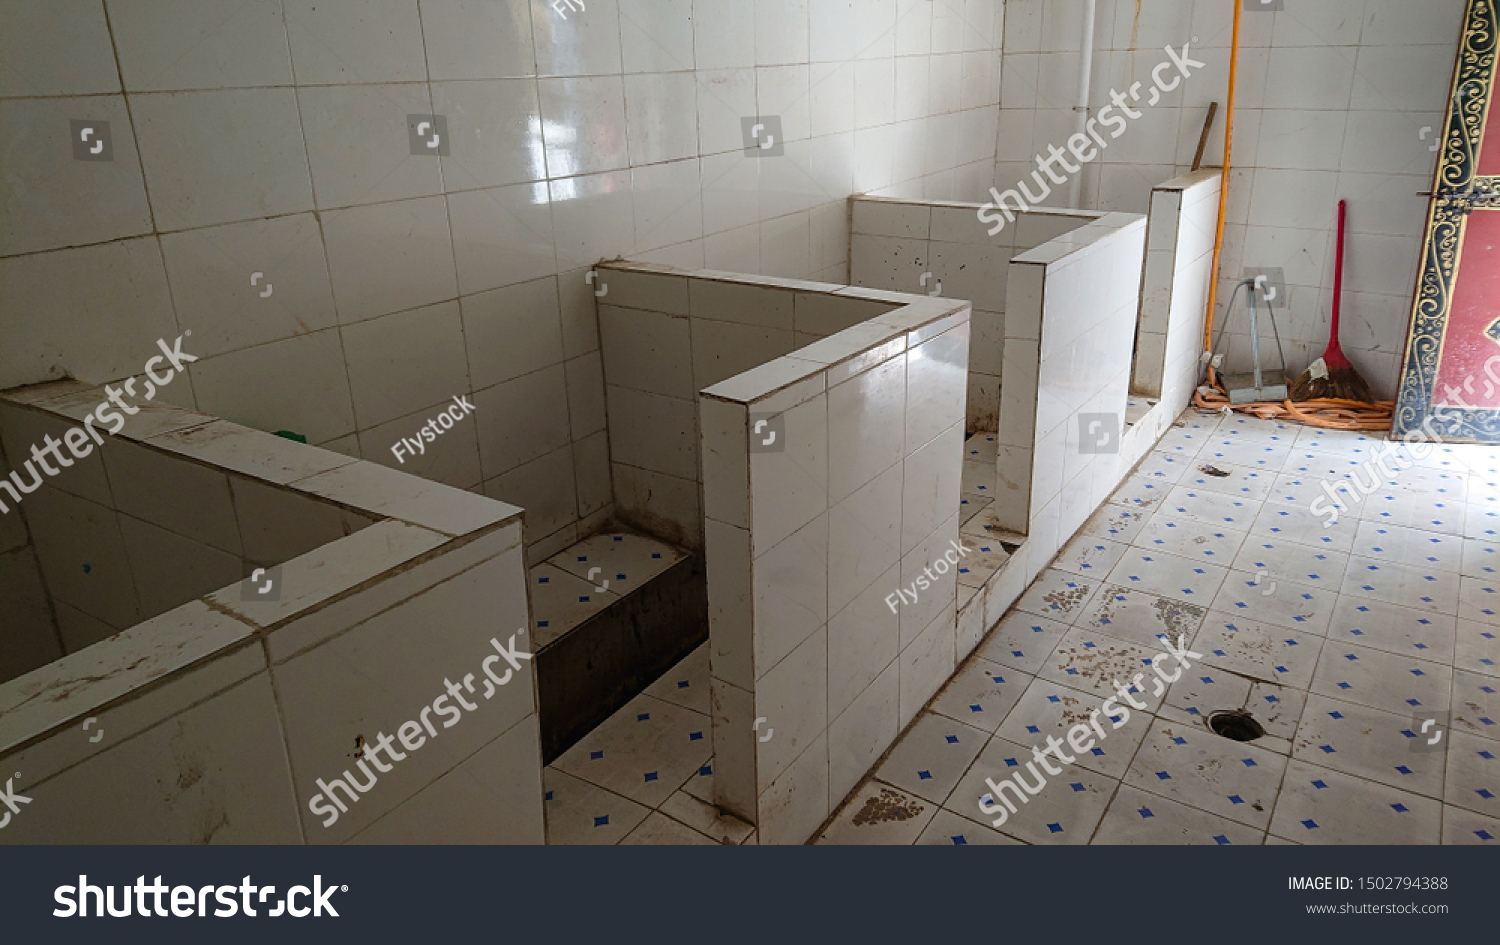 CLOSE UP: Empty public toilets in remote Tibetan town with waist high dividers. Dreary view of smelly squat latrines in China separated by only short walls. Unhygienic restrooms with no privacy. #1502794388